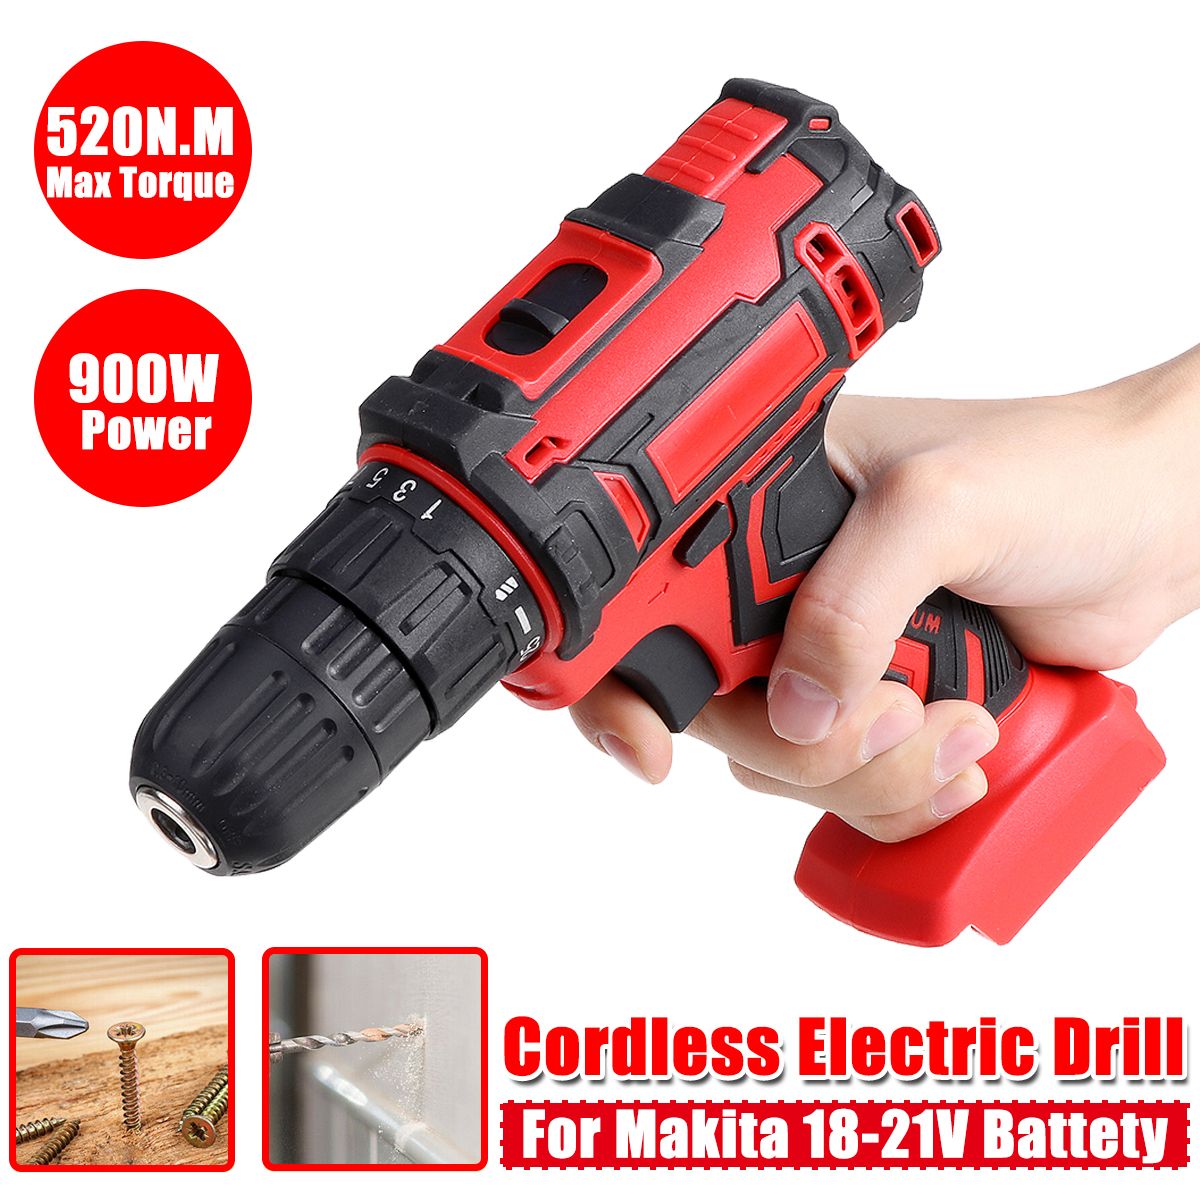 520NM-Cordless-Electric-Drill-Screwdriver-2-Speeds-Fit-For-Makita-18-21V-Battery-1749062